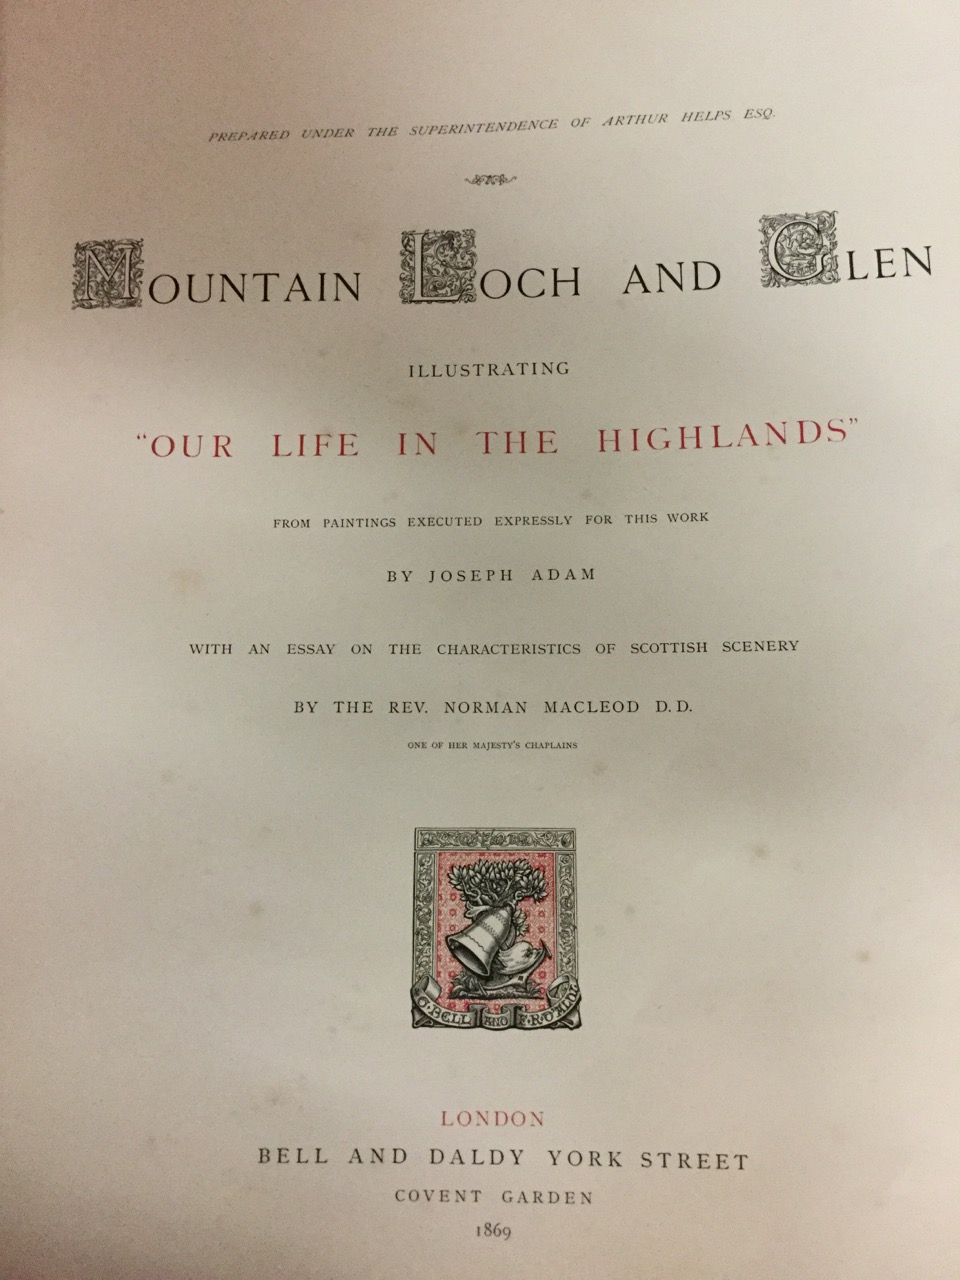 Mountain, Loch and Glen, a crossbanded burr maple bound volume published in 1869 by Bell & Daldy,